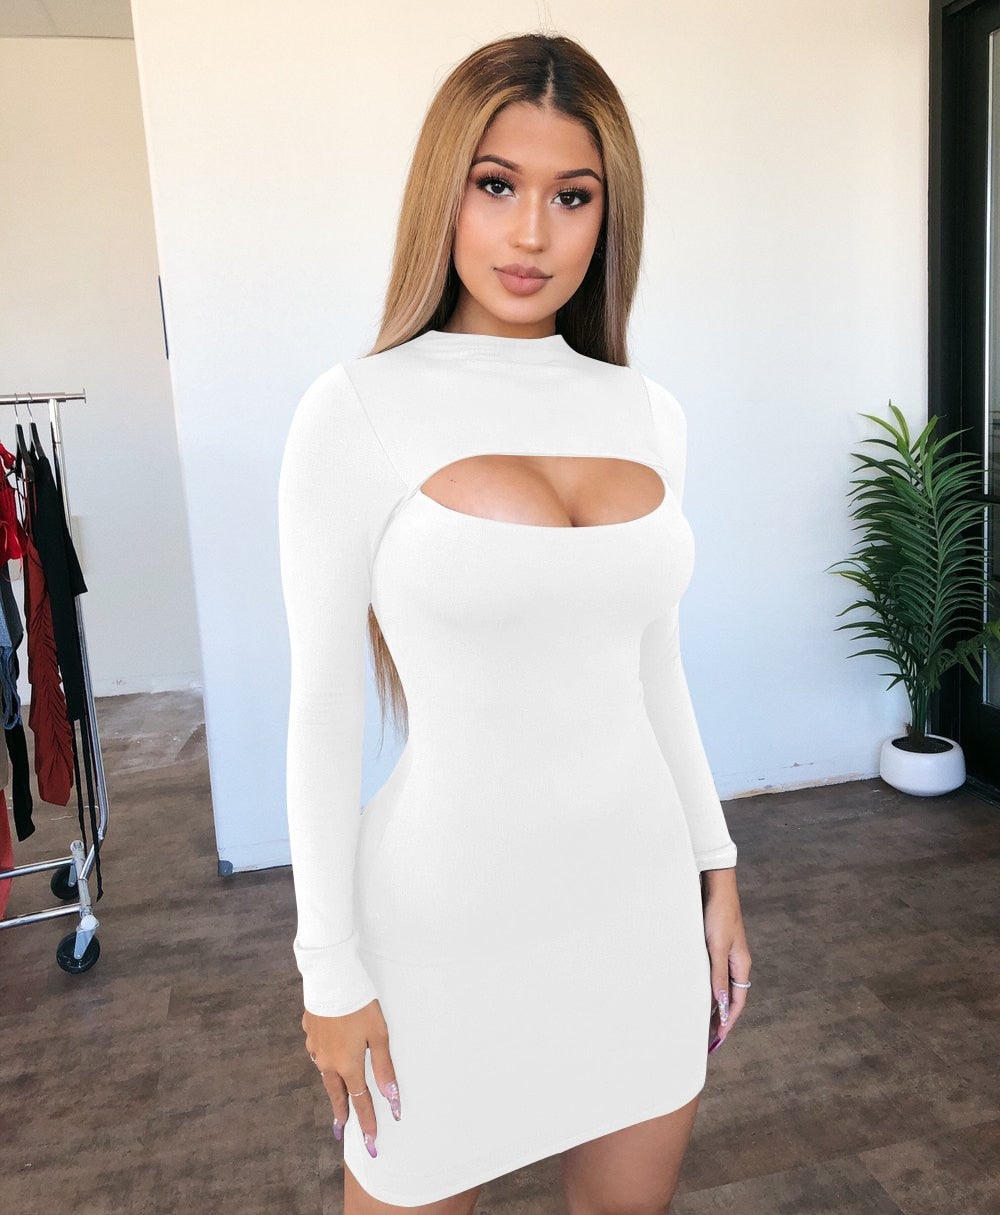 club bodycon clothes hollow out sexy corset mini dress sexy dresses for women  Apparel & Accessories > Clothing > Dresses 53.99 EZYSELLA SHOP